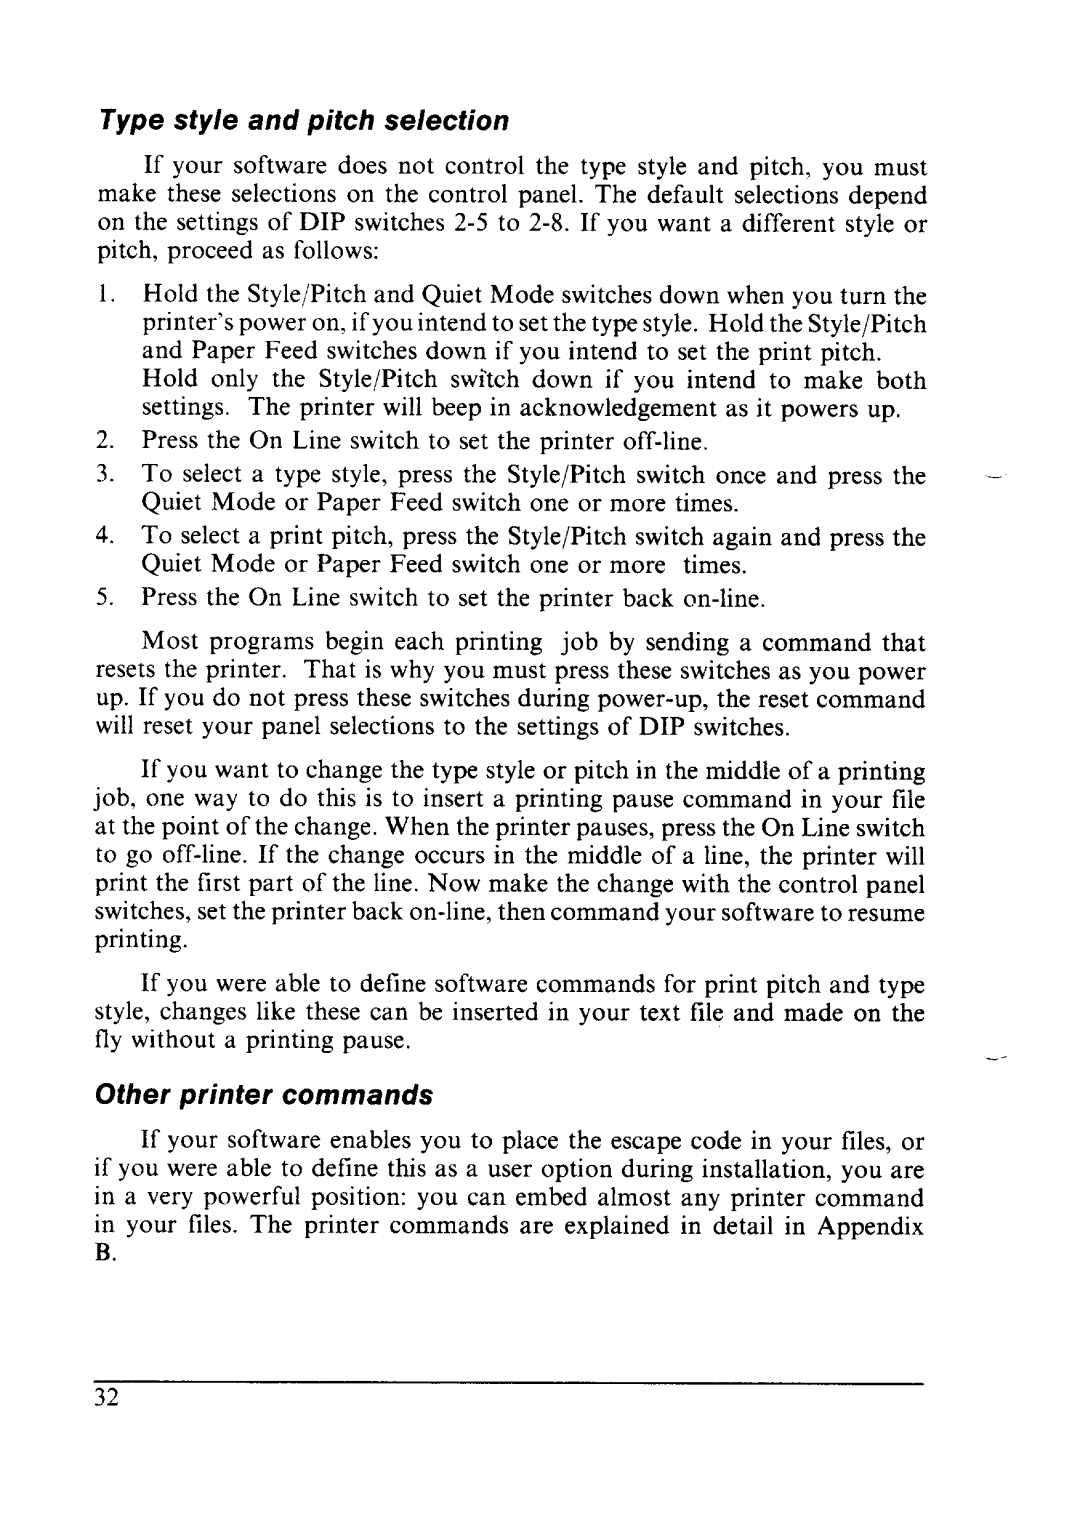 Star Micronics LC24-10 user manual Other printer commands, Type style and pitch selection 